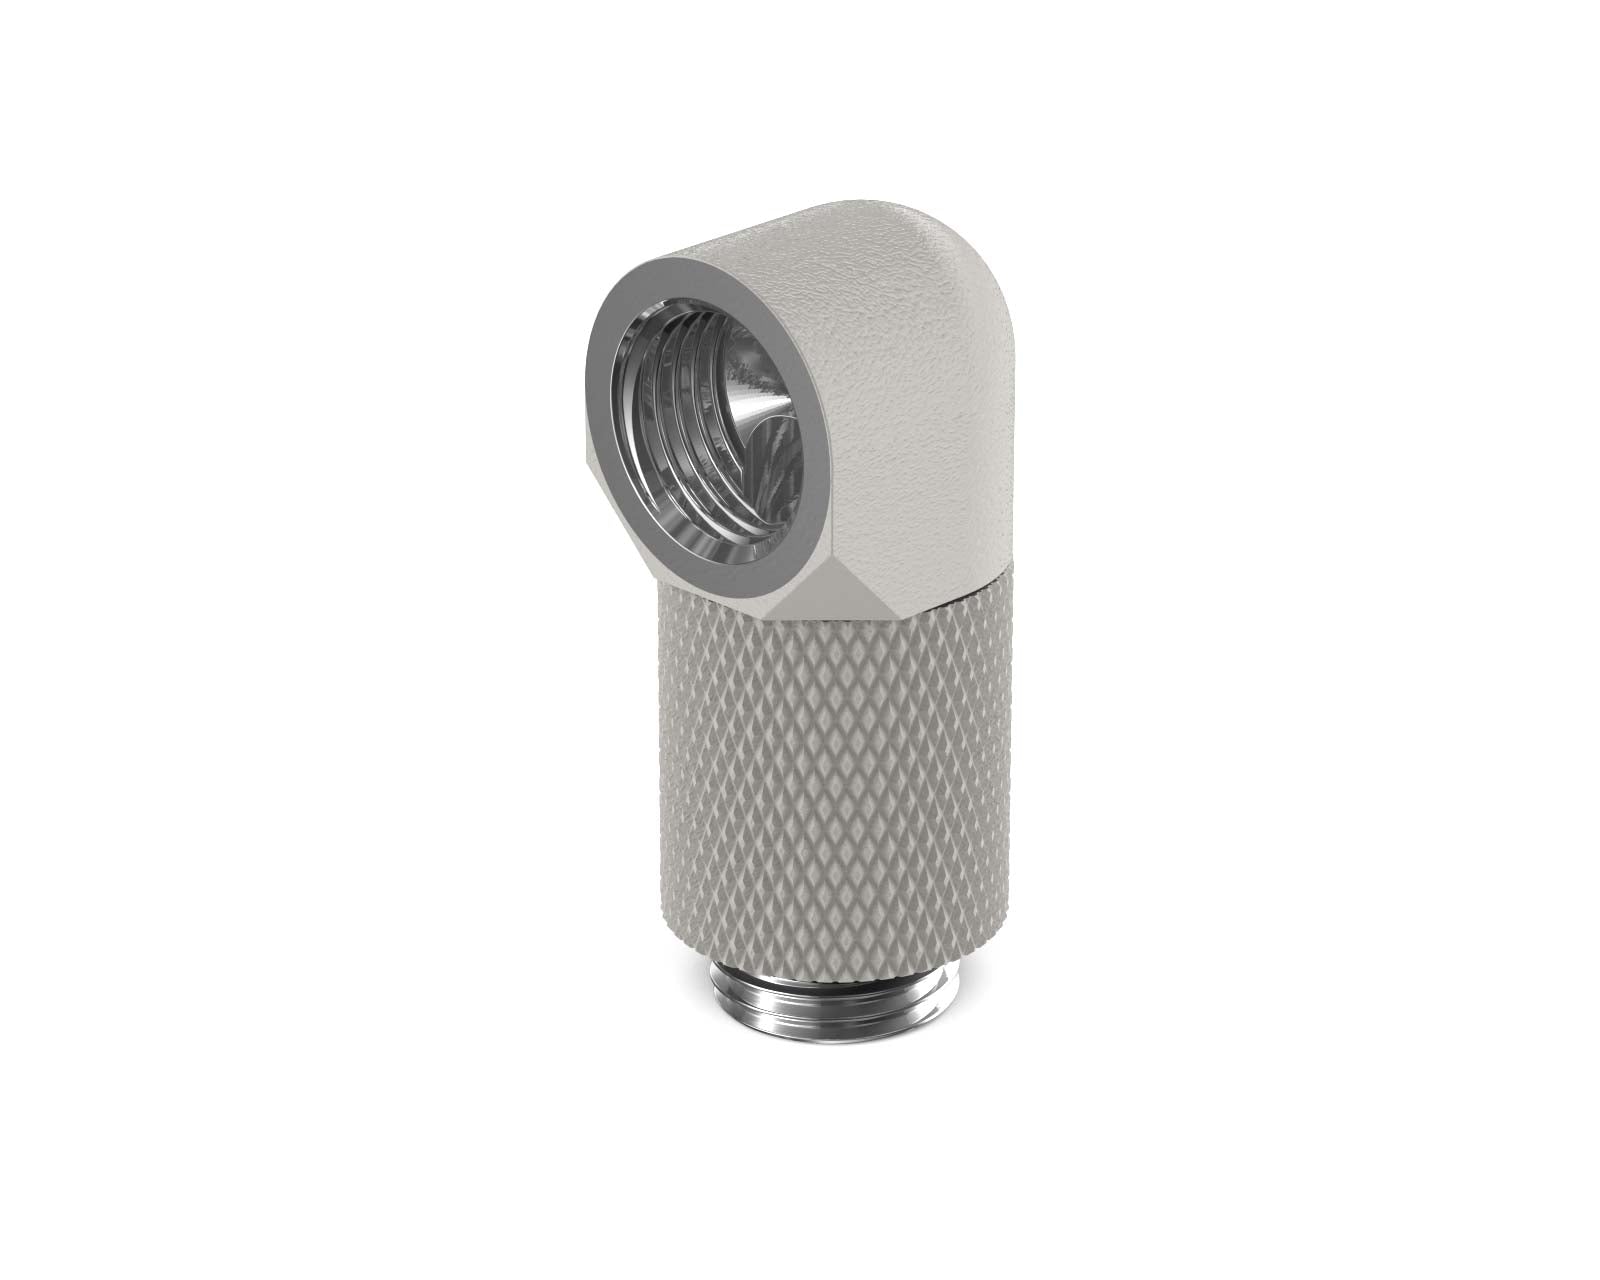 PrimoChill Male to Female G 1/4in. 90 Degree SX Rotary 20mm Extension Elbow Fitting - PrimoChill - KEEPING IT COOL TX Matte Silver